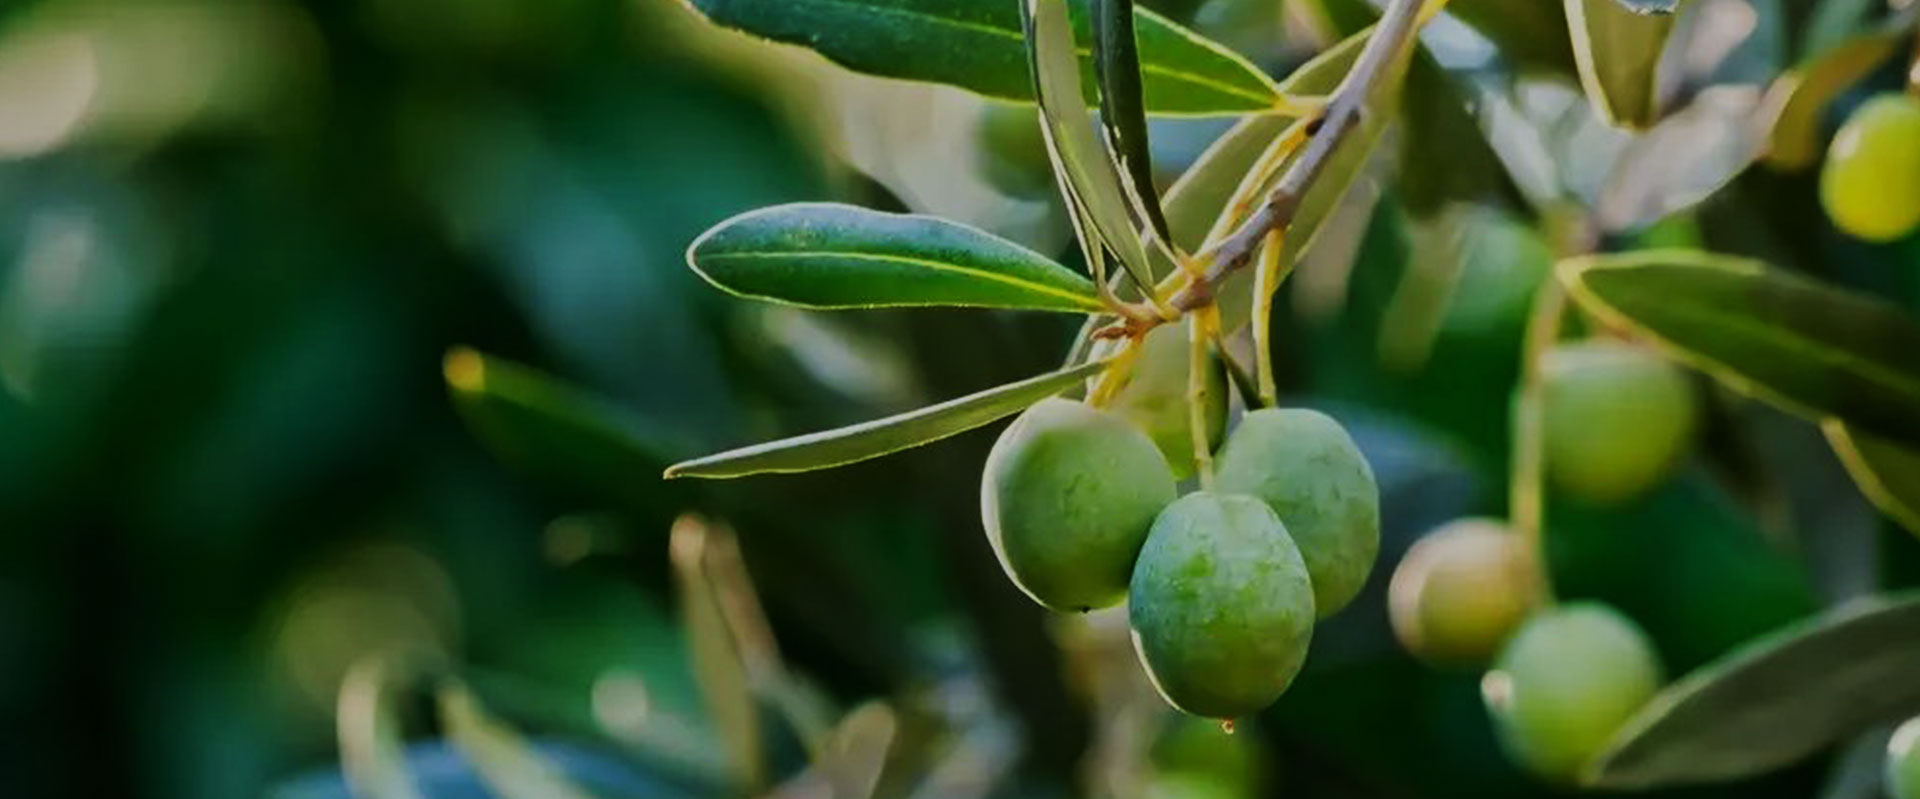 ACE Biotechnology connects to sustainable resource of Sophora flower buds for Quercetin & Rutin production